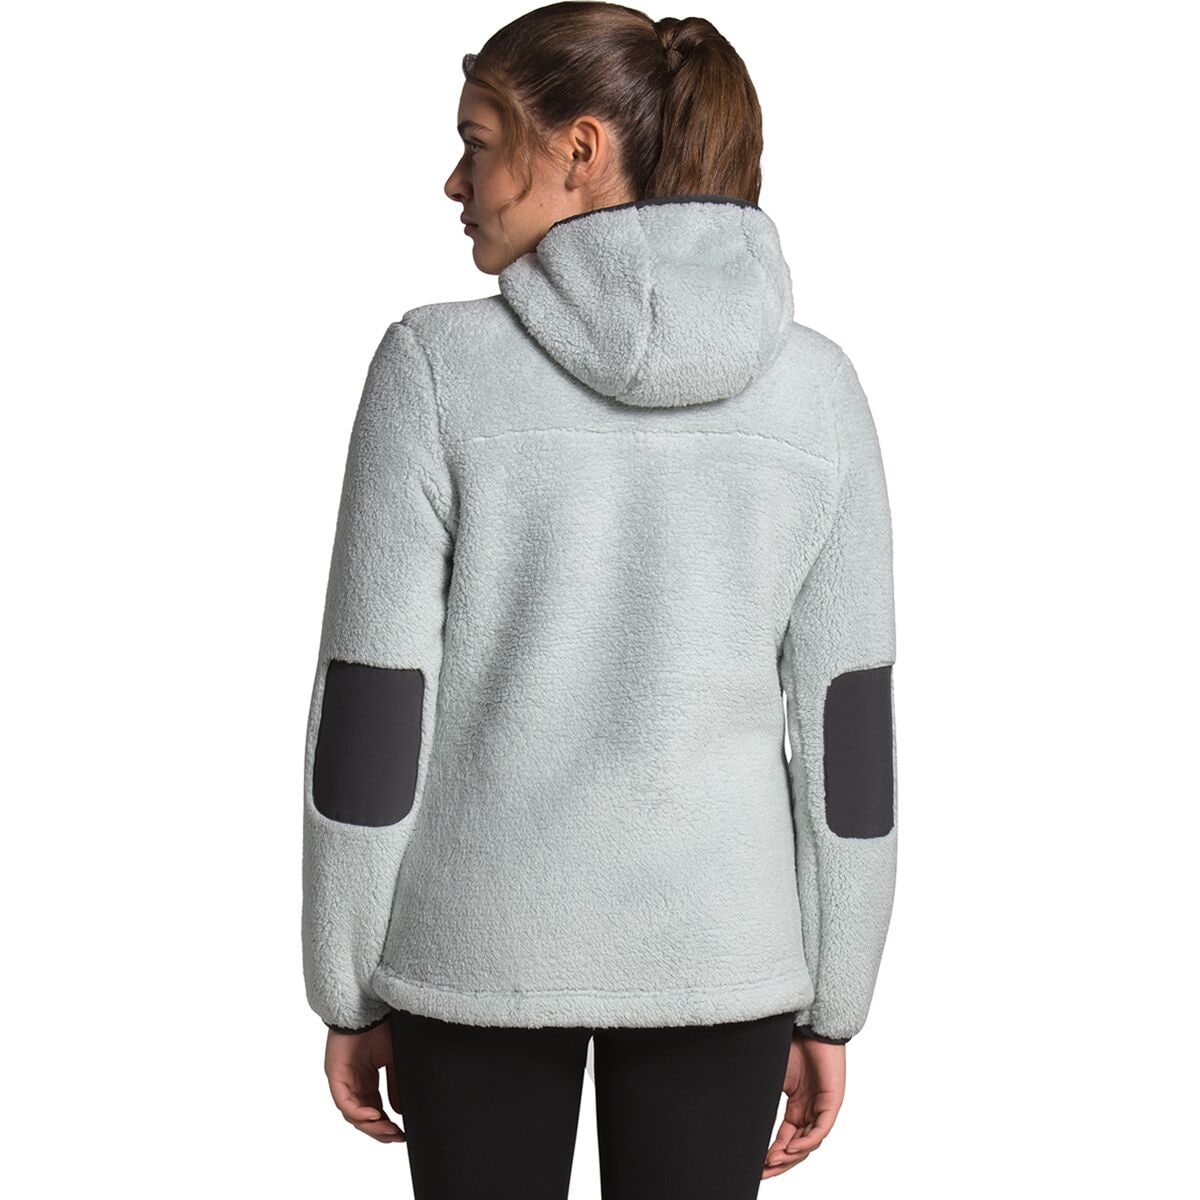 The North Face Campshire 2.0 Pullover Fleece Hoodie - Women's - Clothing